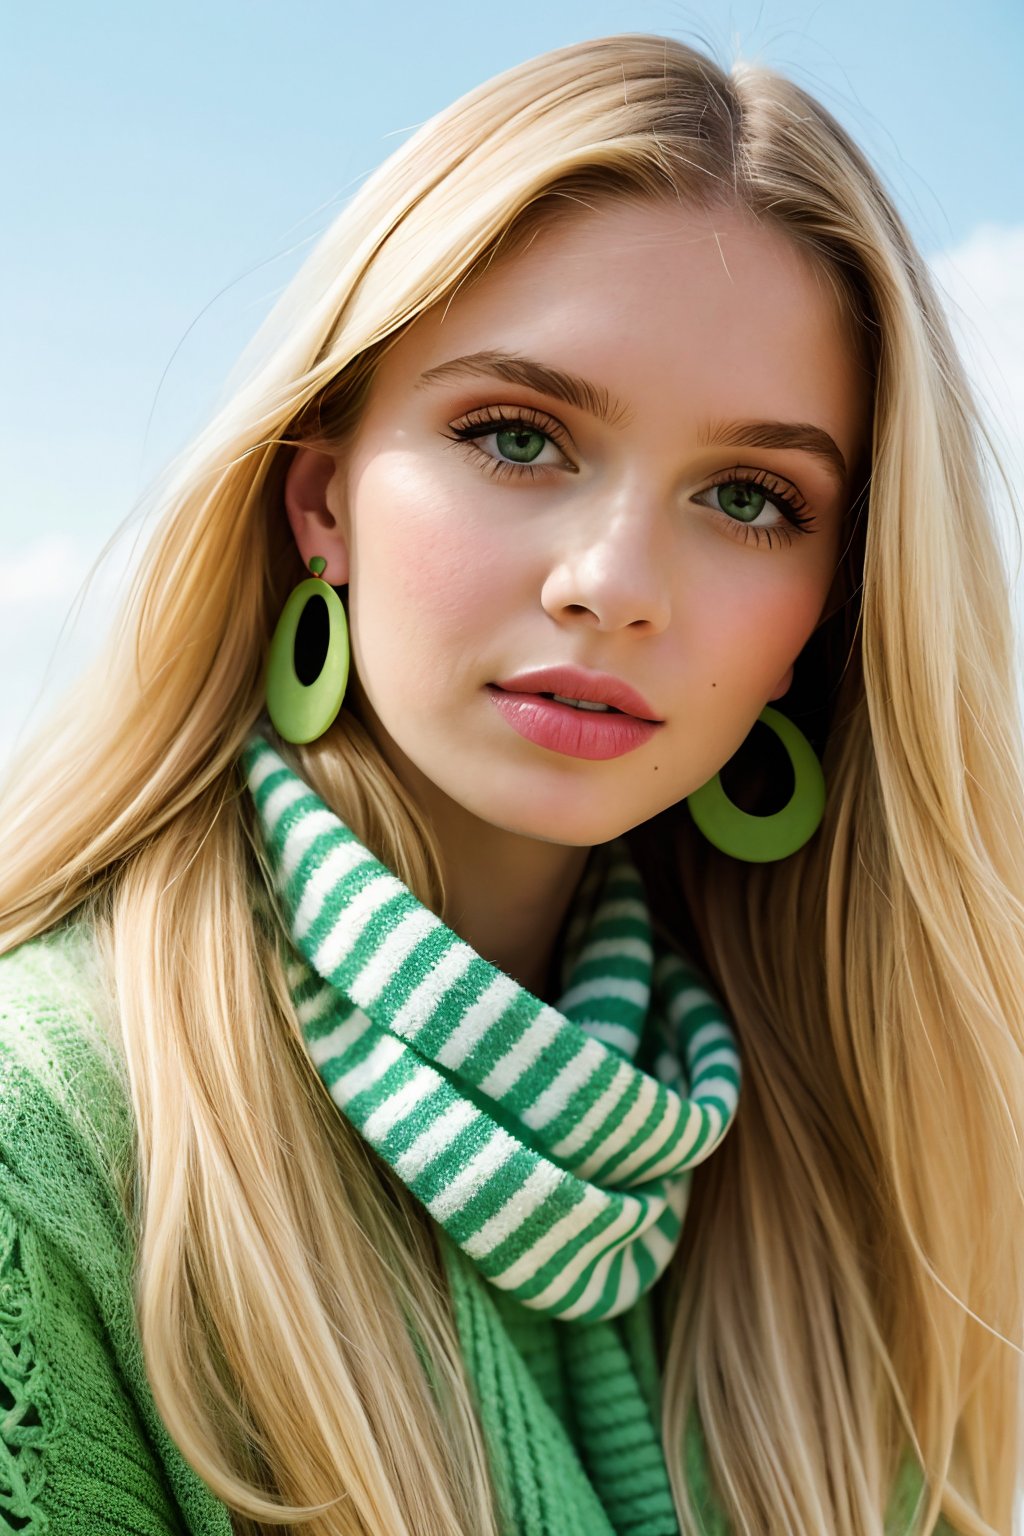 A pale young woman with long blonde hair and greenmake up, a green striped scarf, and playful kiwi earrings, looking directly at the camera, a portrait in the style of a 1960s fashion magazine, with bright colors, sharp focus, and a soft, natural light.